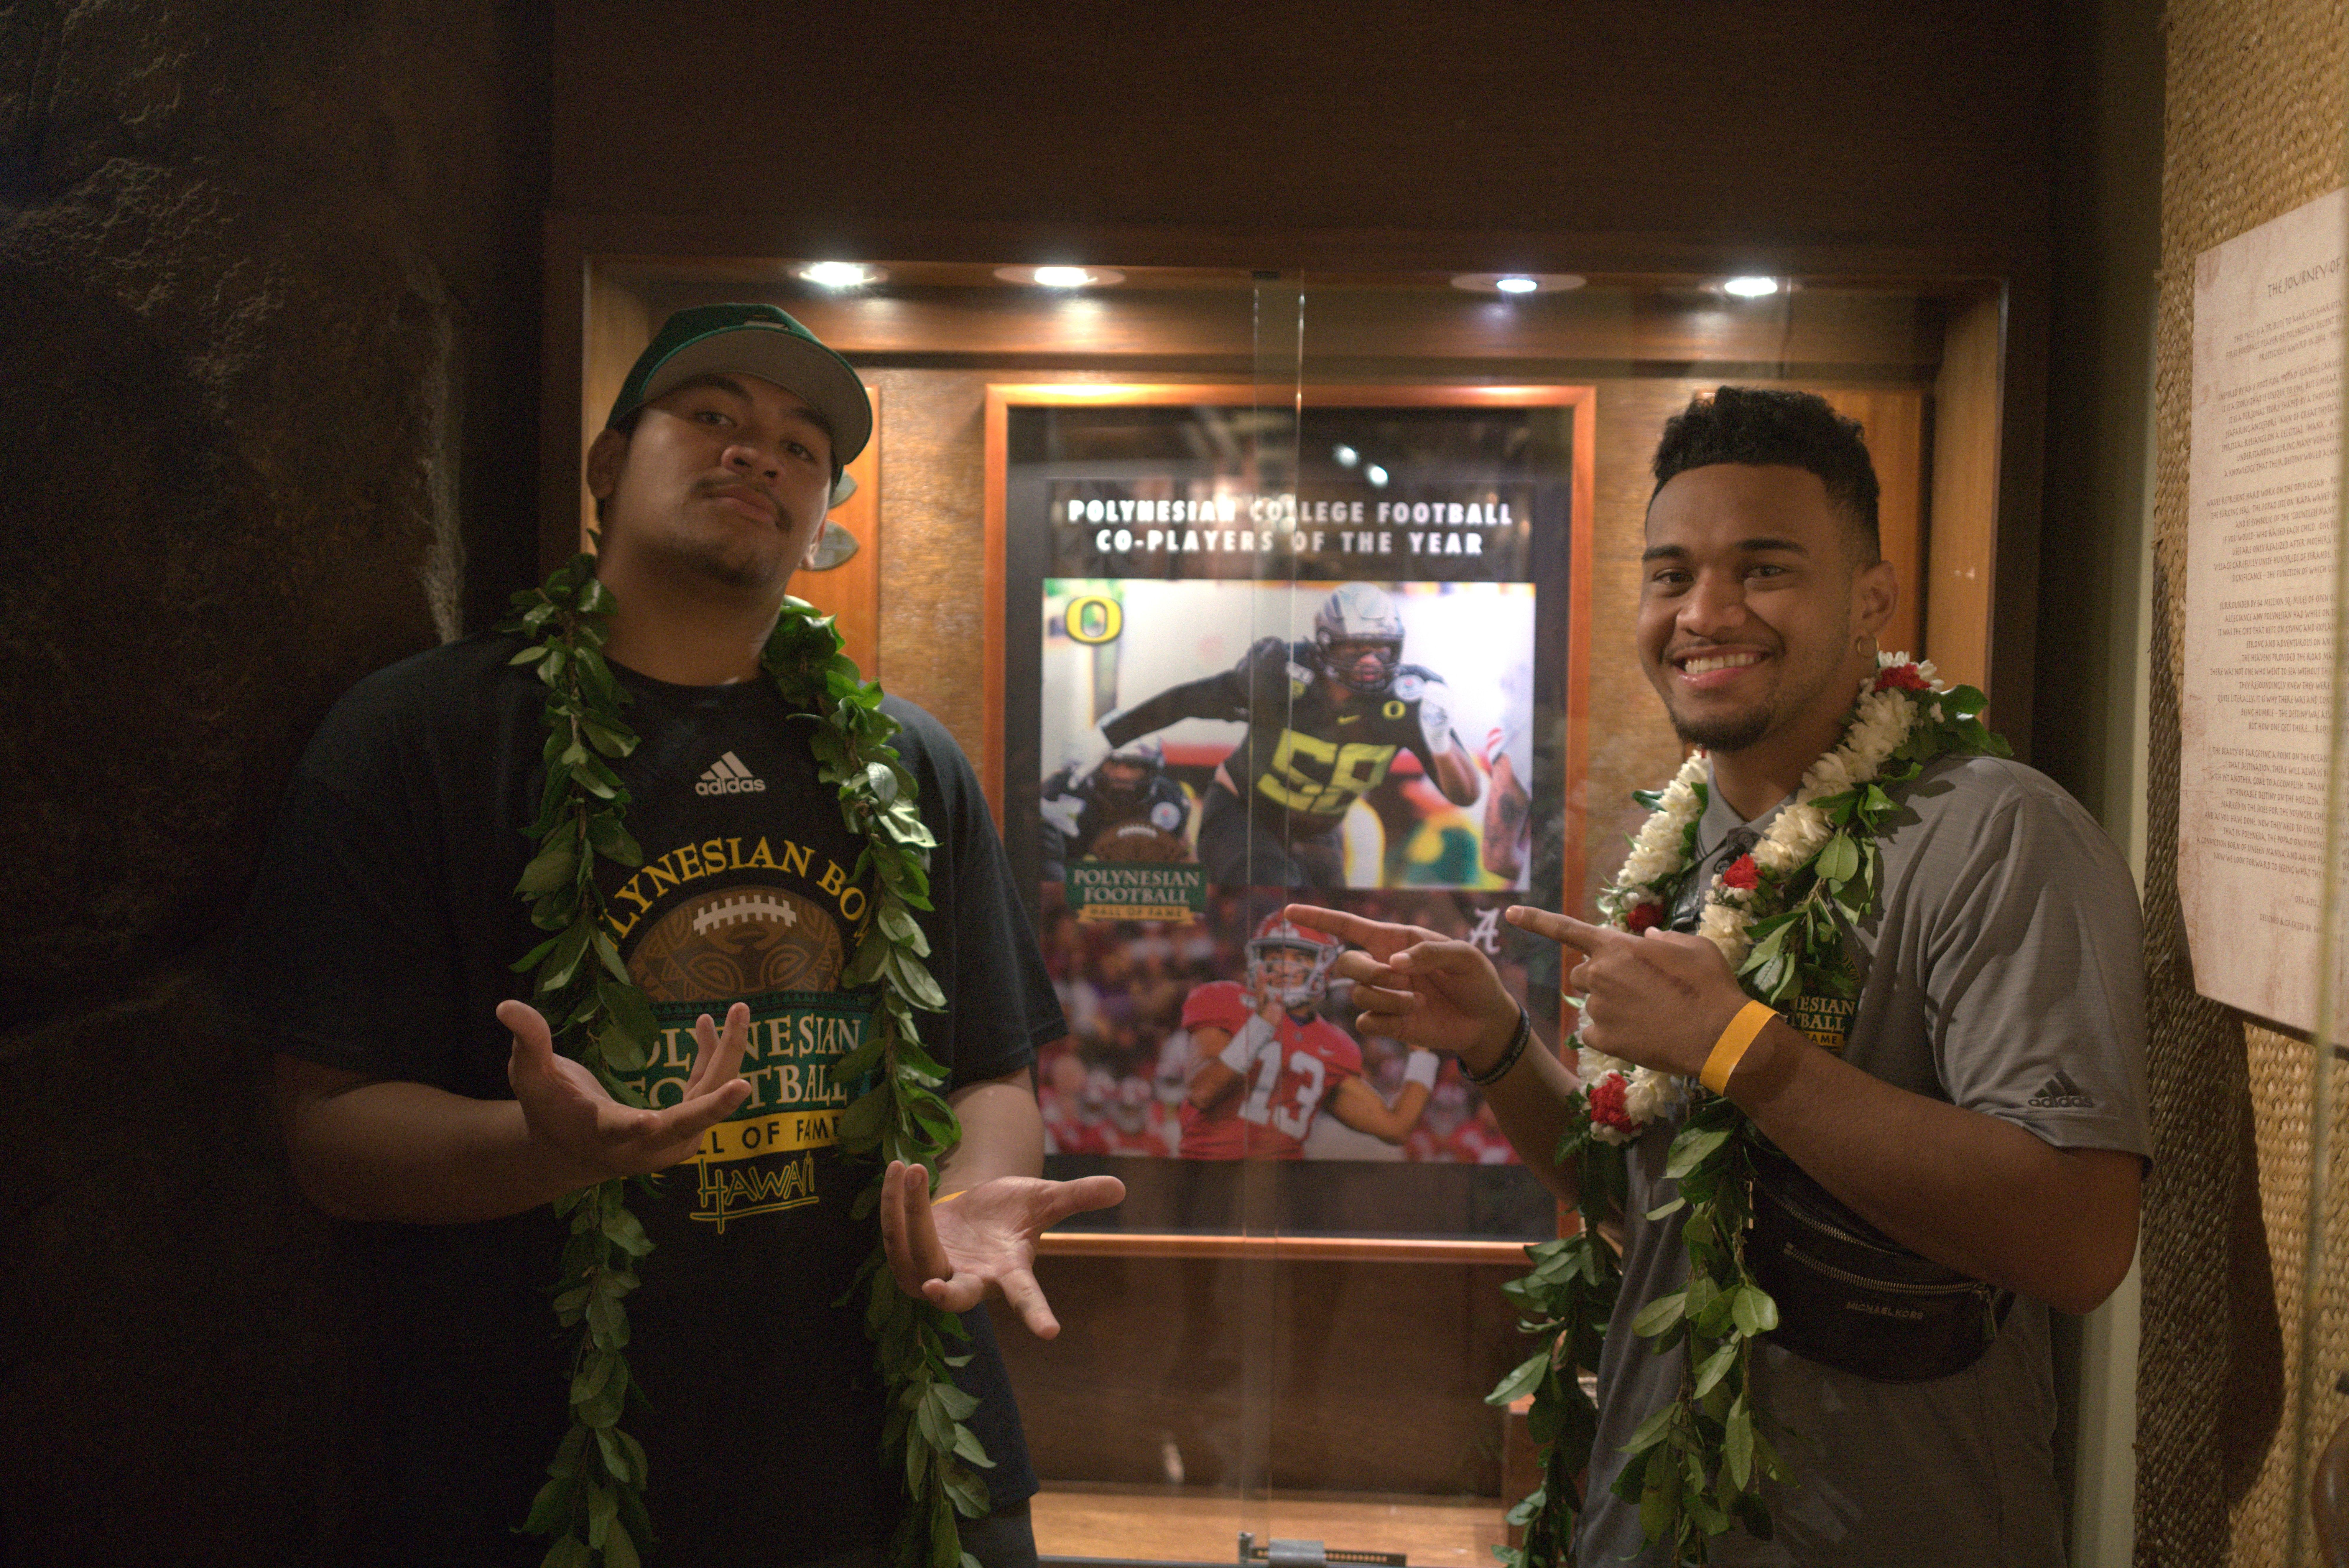 Photo of Peni Sewell (l) and Tua Tagovailoa (r), co-recipients of the 2019 Polynesian Football Hall of Fame College Players of the Year.